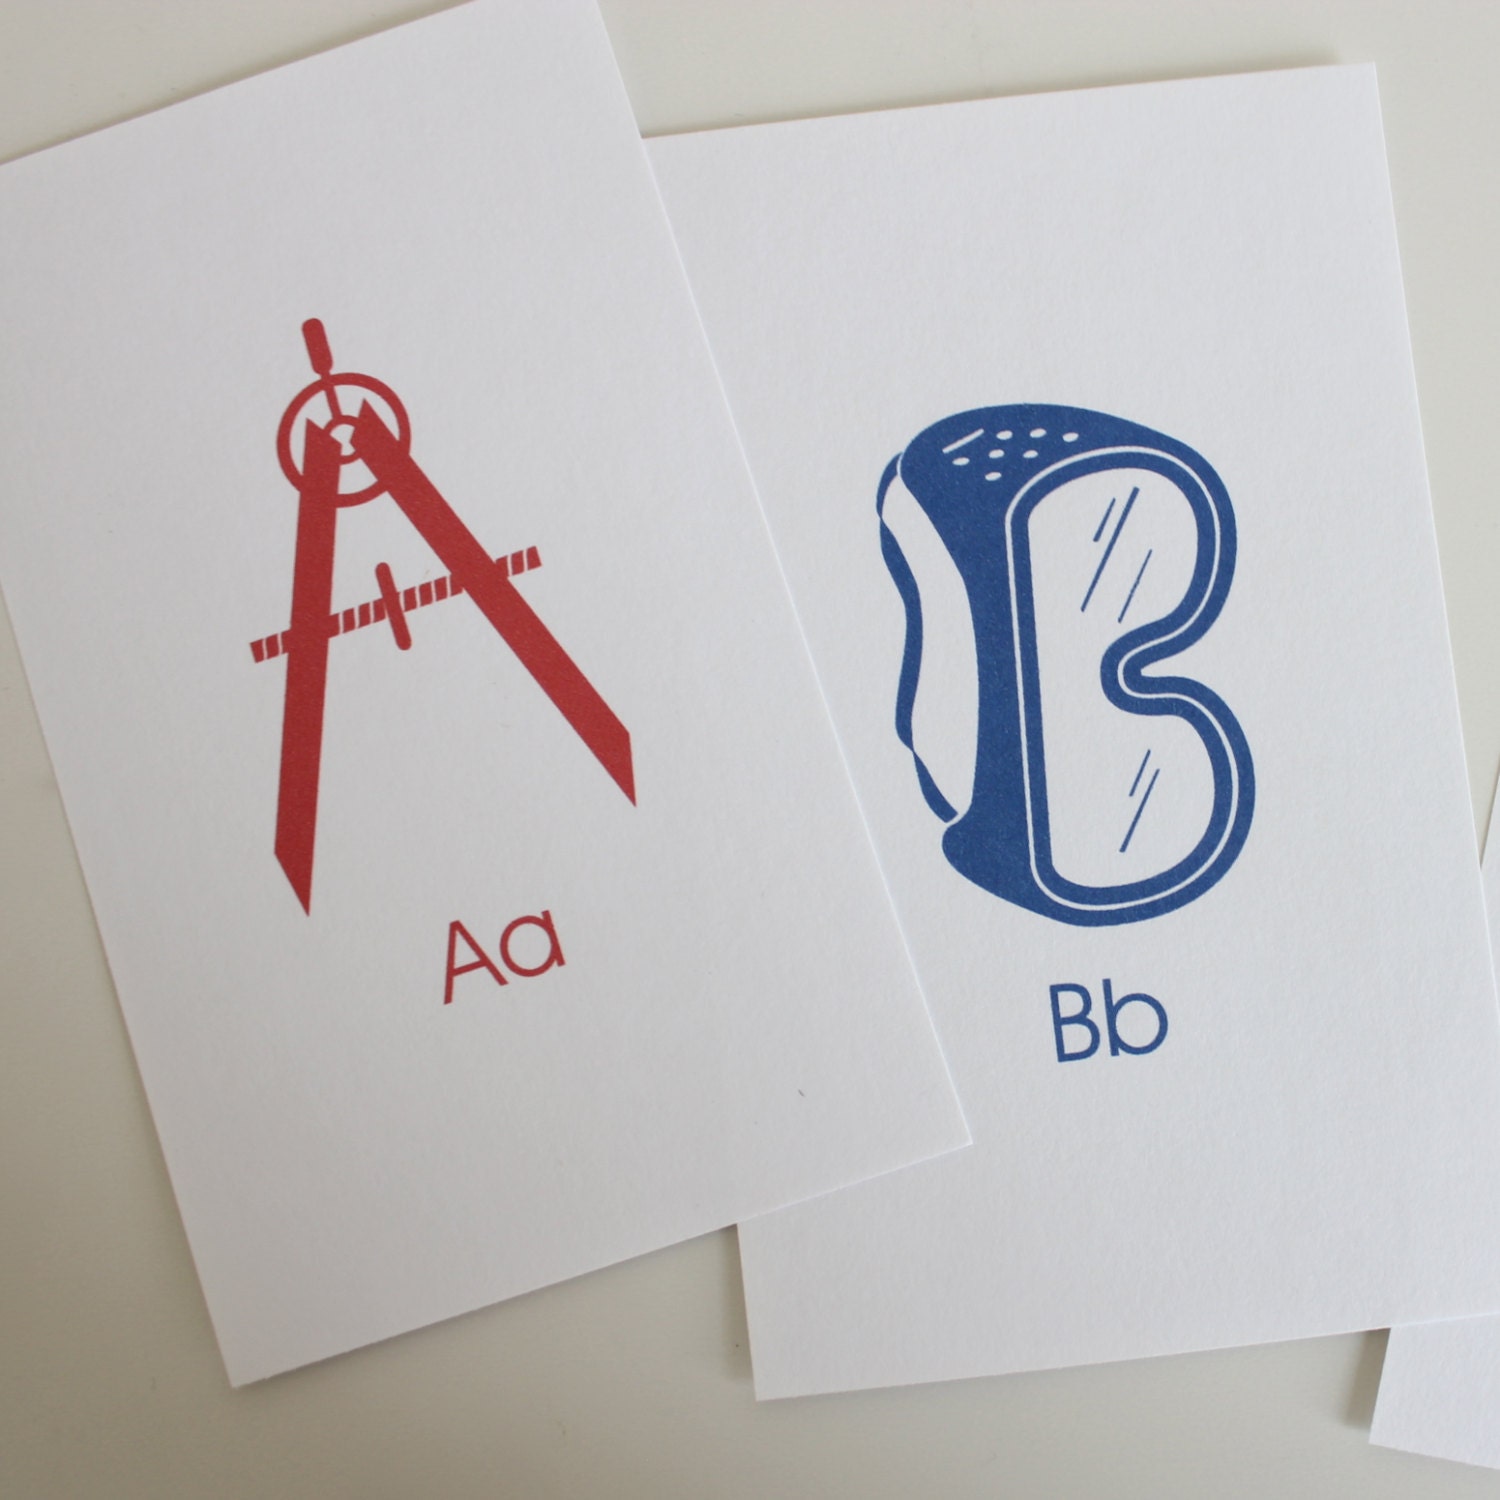 3x5 abc file cards